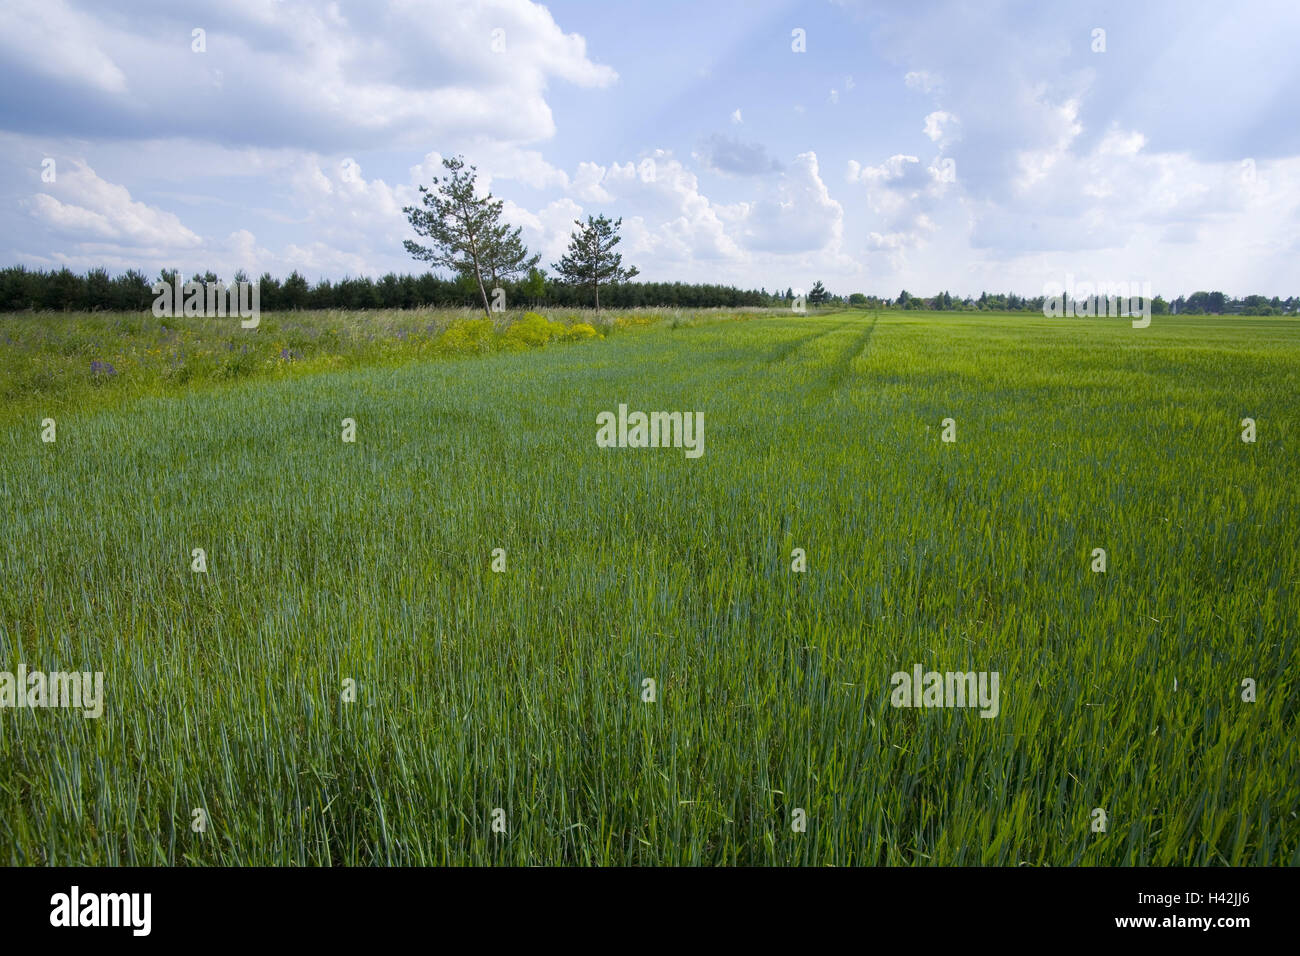 Scenery, meadow, plants, summers, cloudy sky, Stock Photo